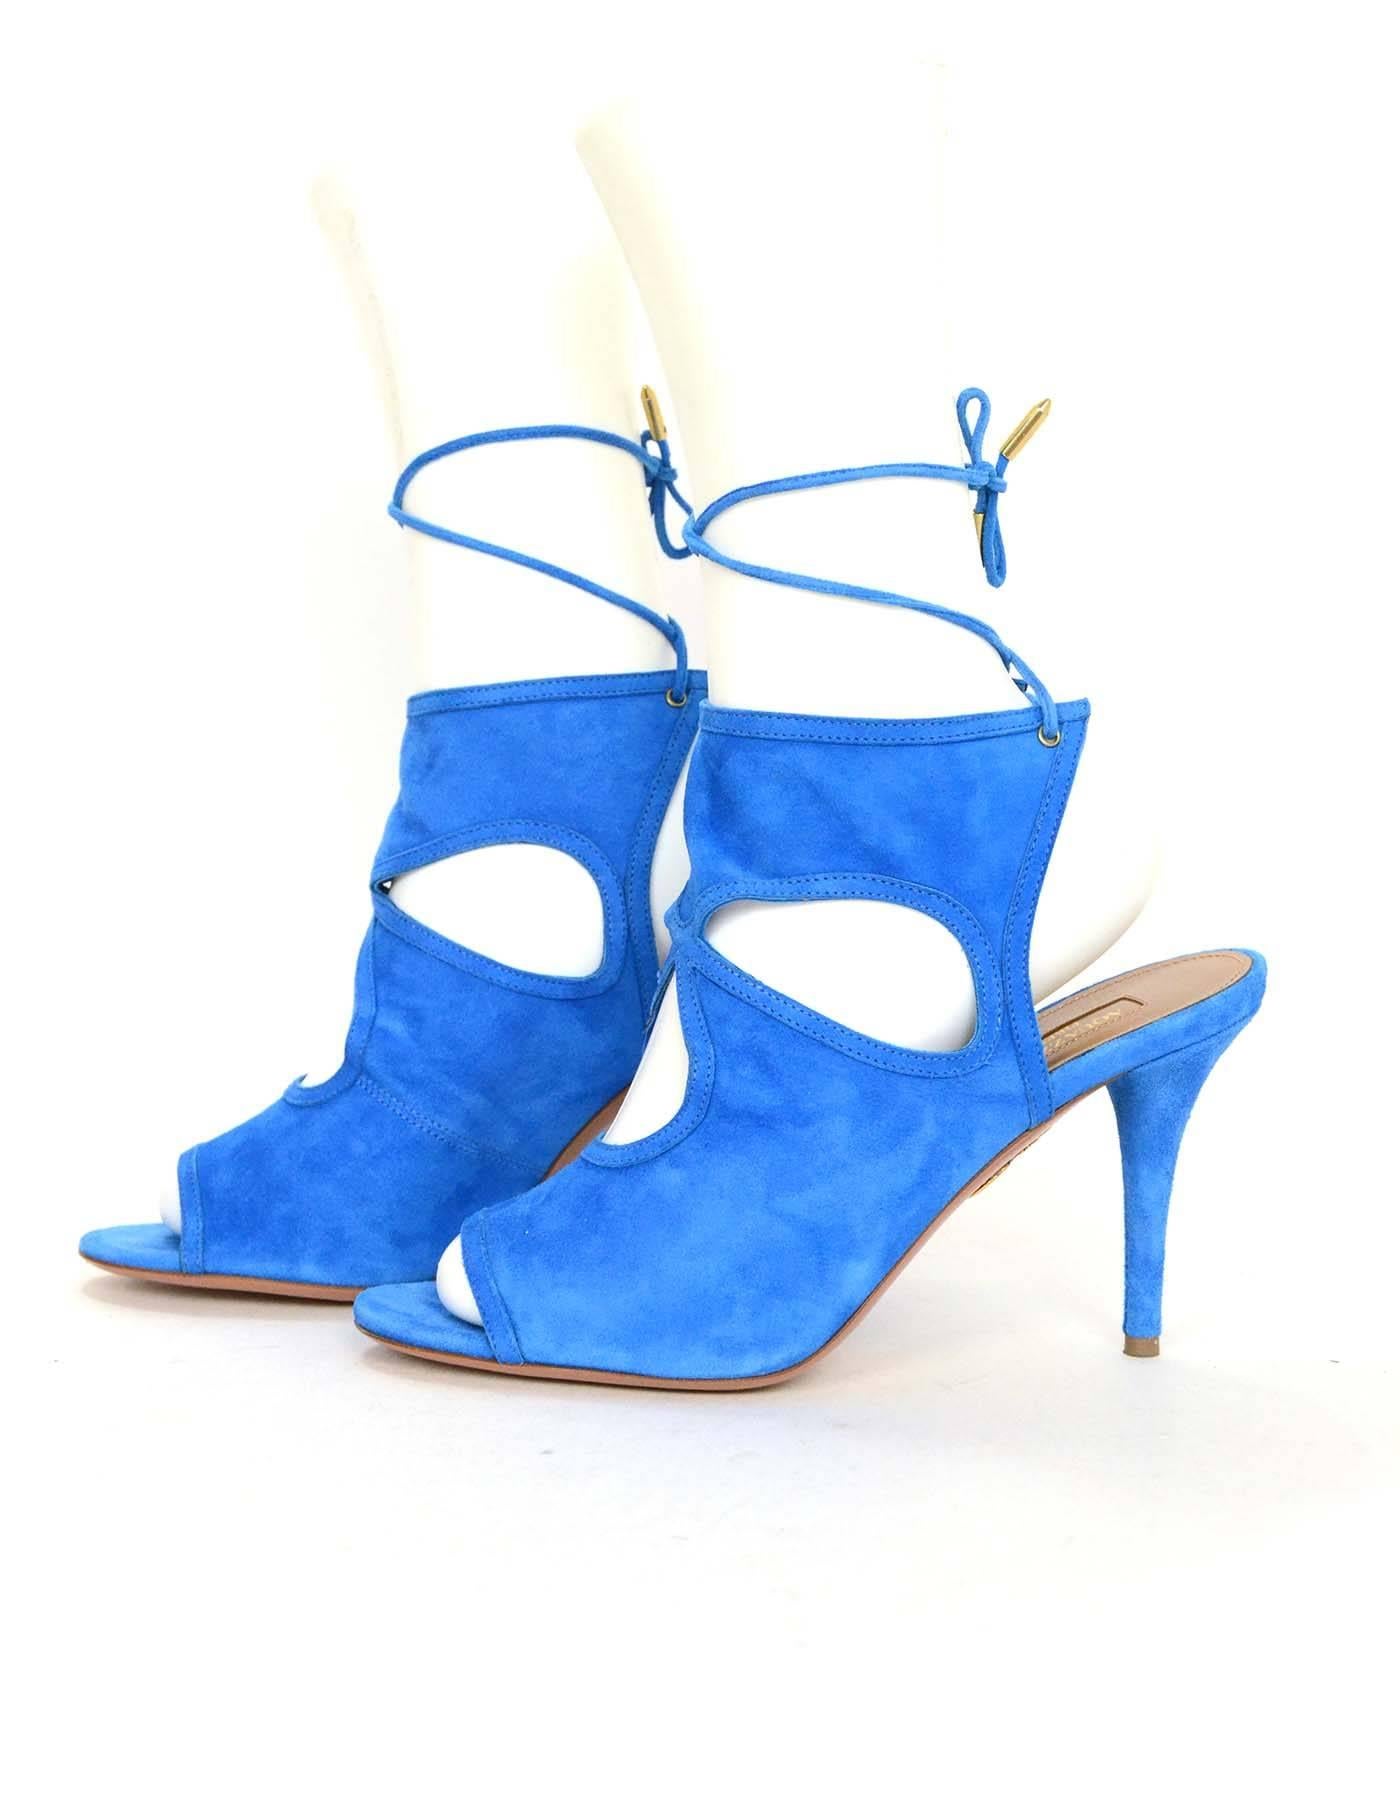 Aquazzura Blue Suede Cut-Out Booties 
Features tie back laces at ankle
Made In: Italy
Color: Blue
Materials: Suede
Closure/Opening: Back lace up tie
Sole Stamp: Aquazzura Firenze Vero Cuoio Made In Itay 38 1/2
Overall Condition: Excellent pre-owned